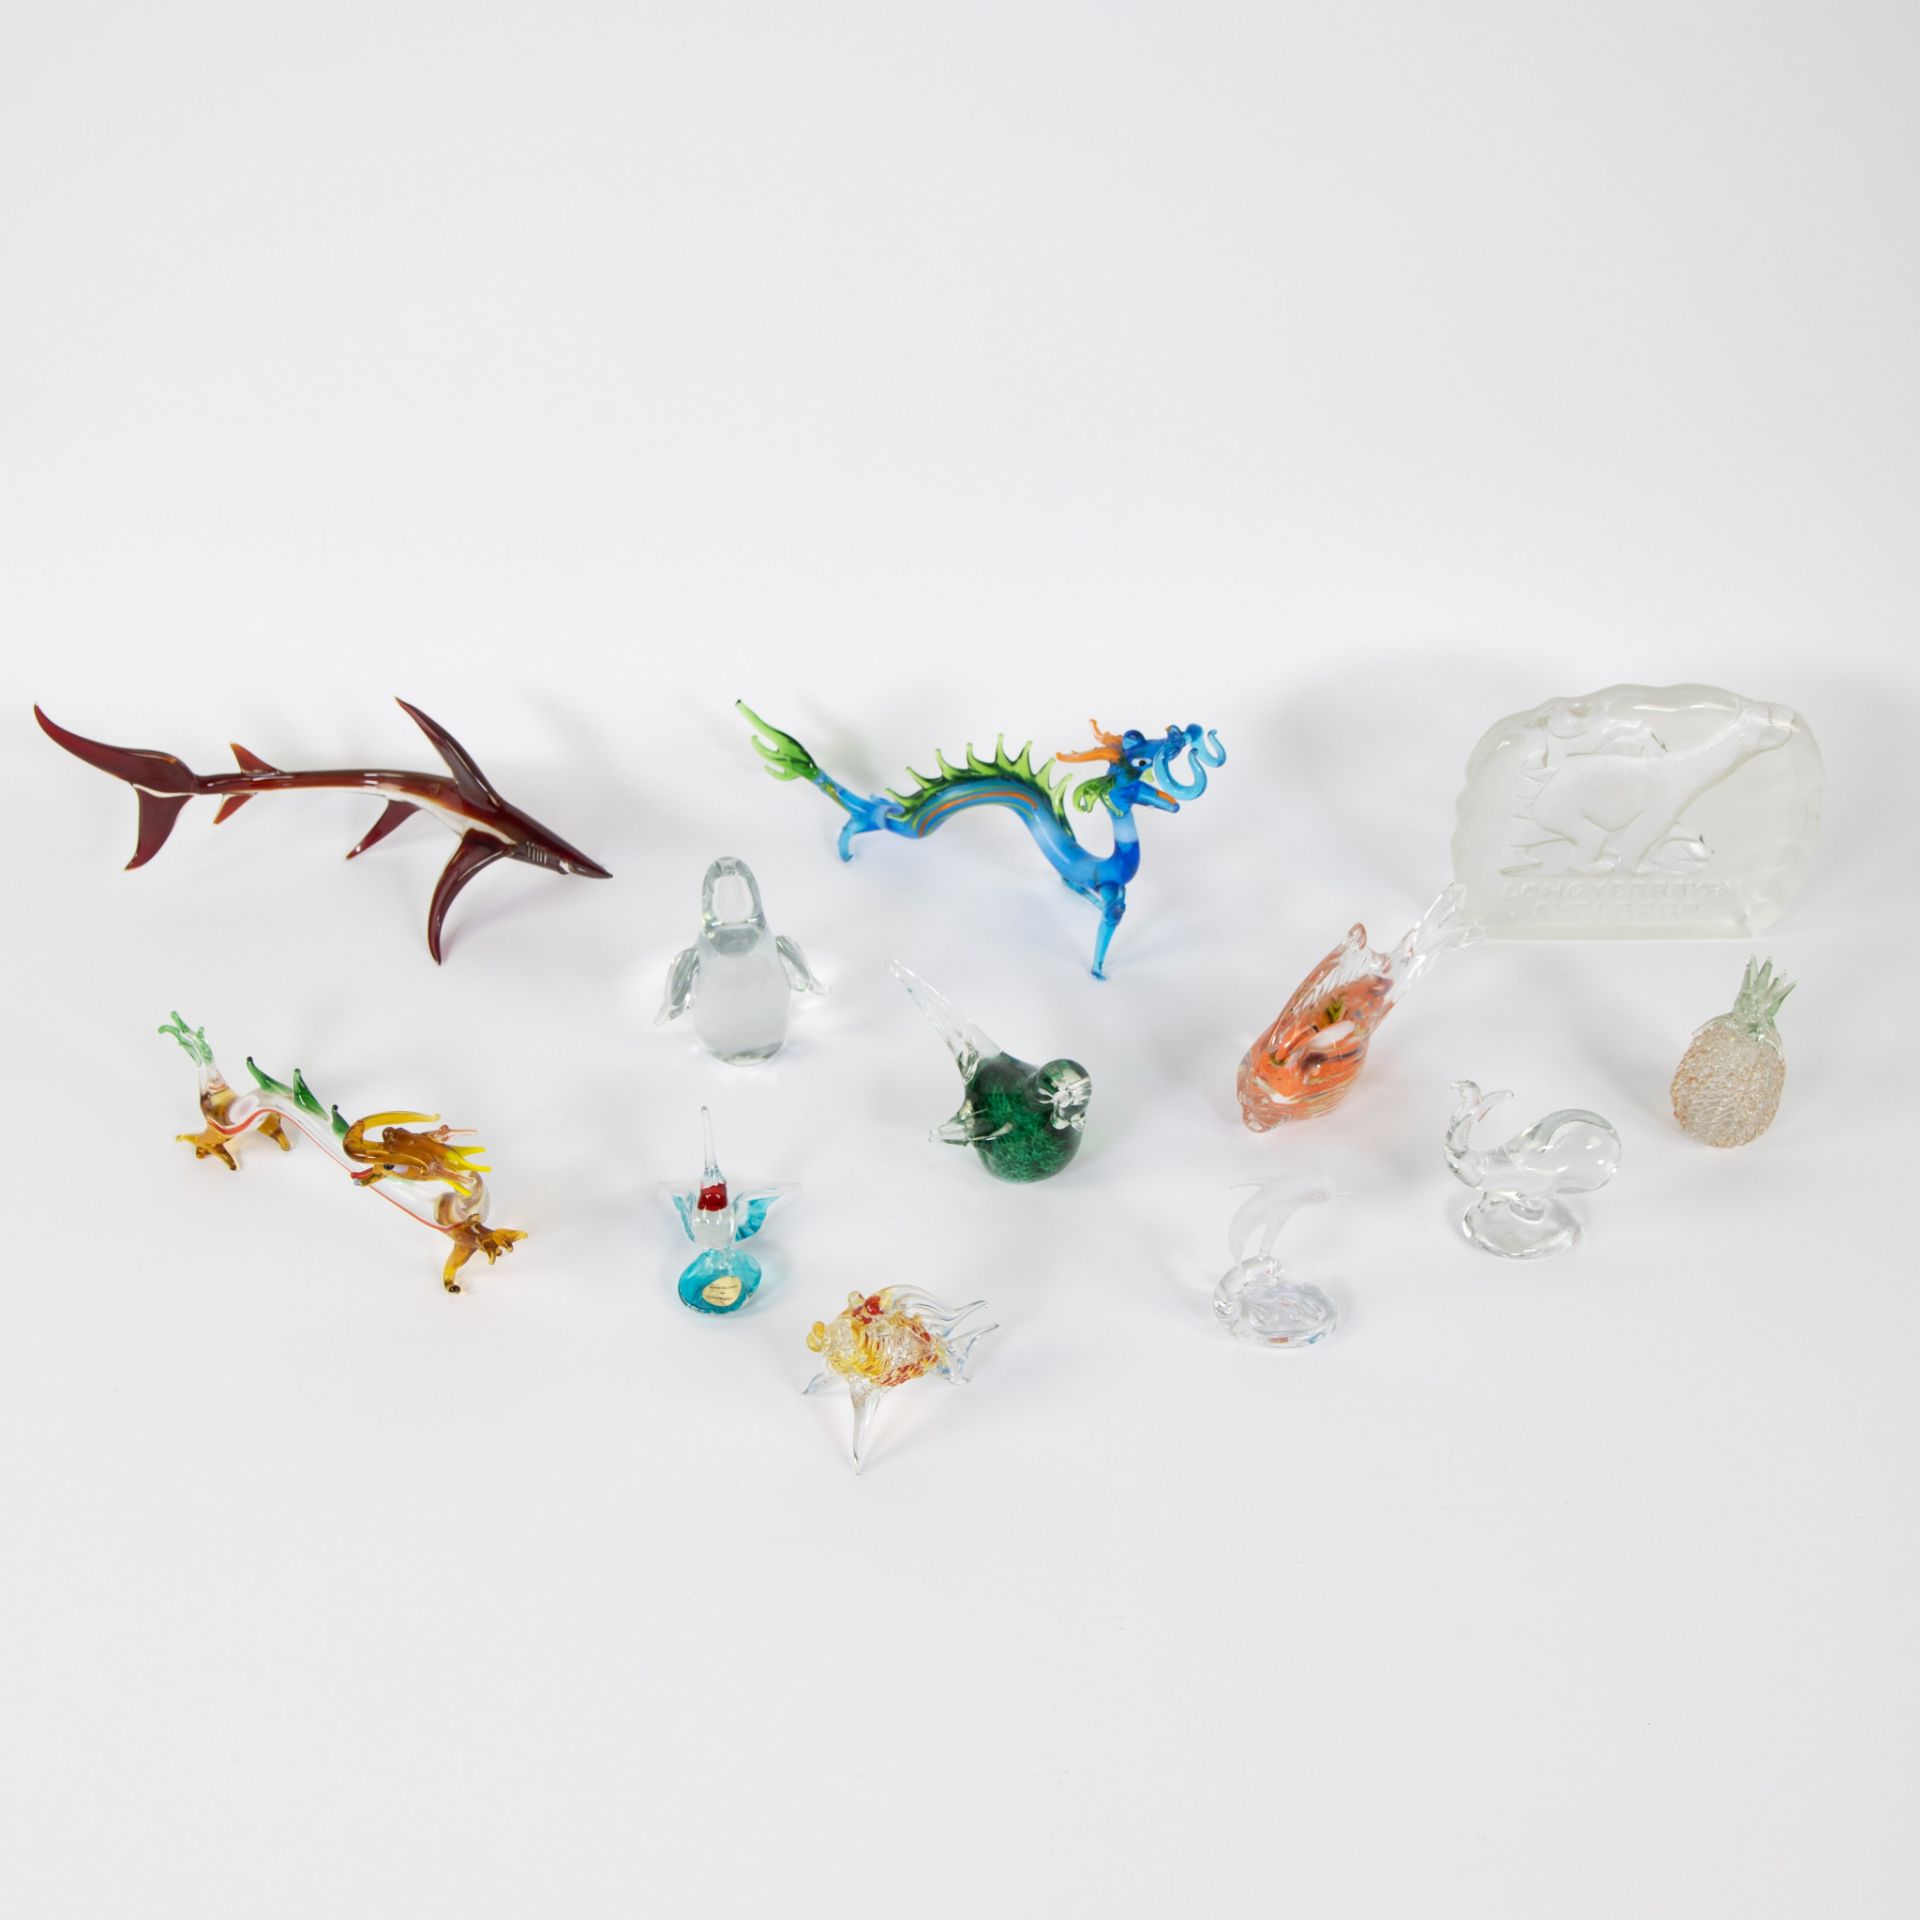 Lot of mouth-blown glass animals, MURANO